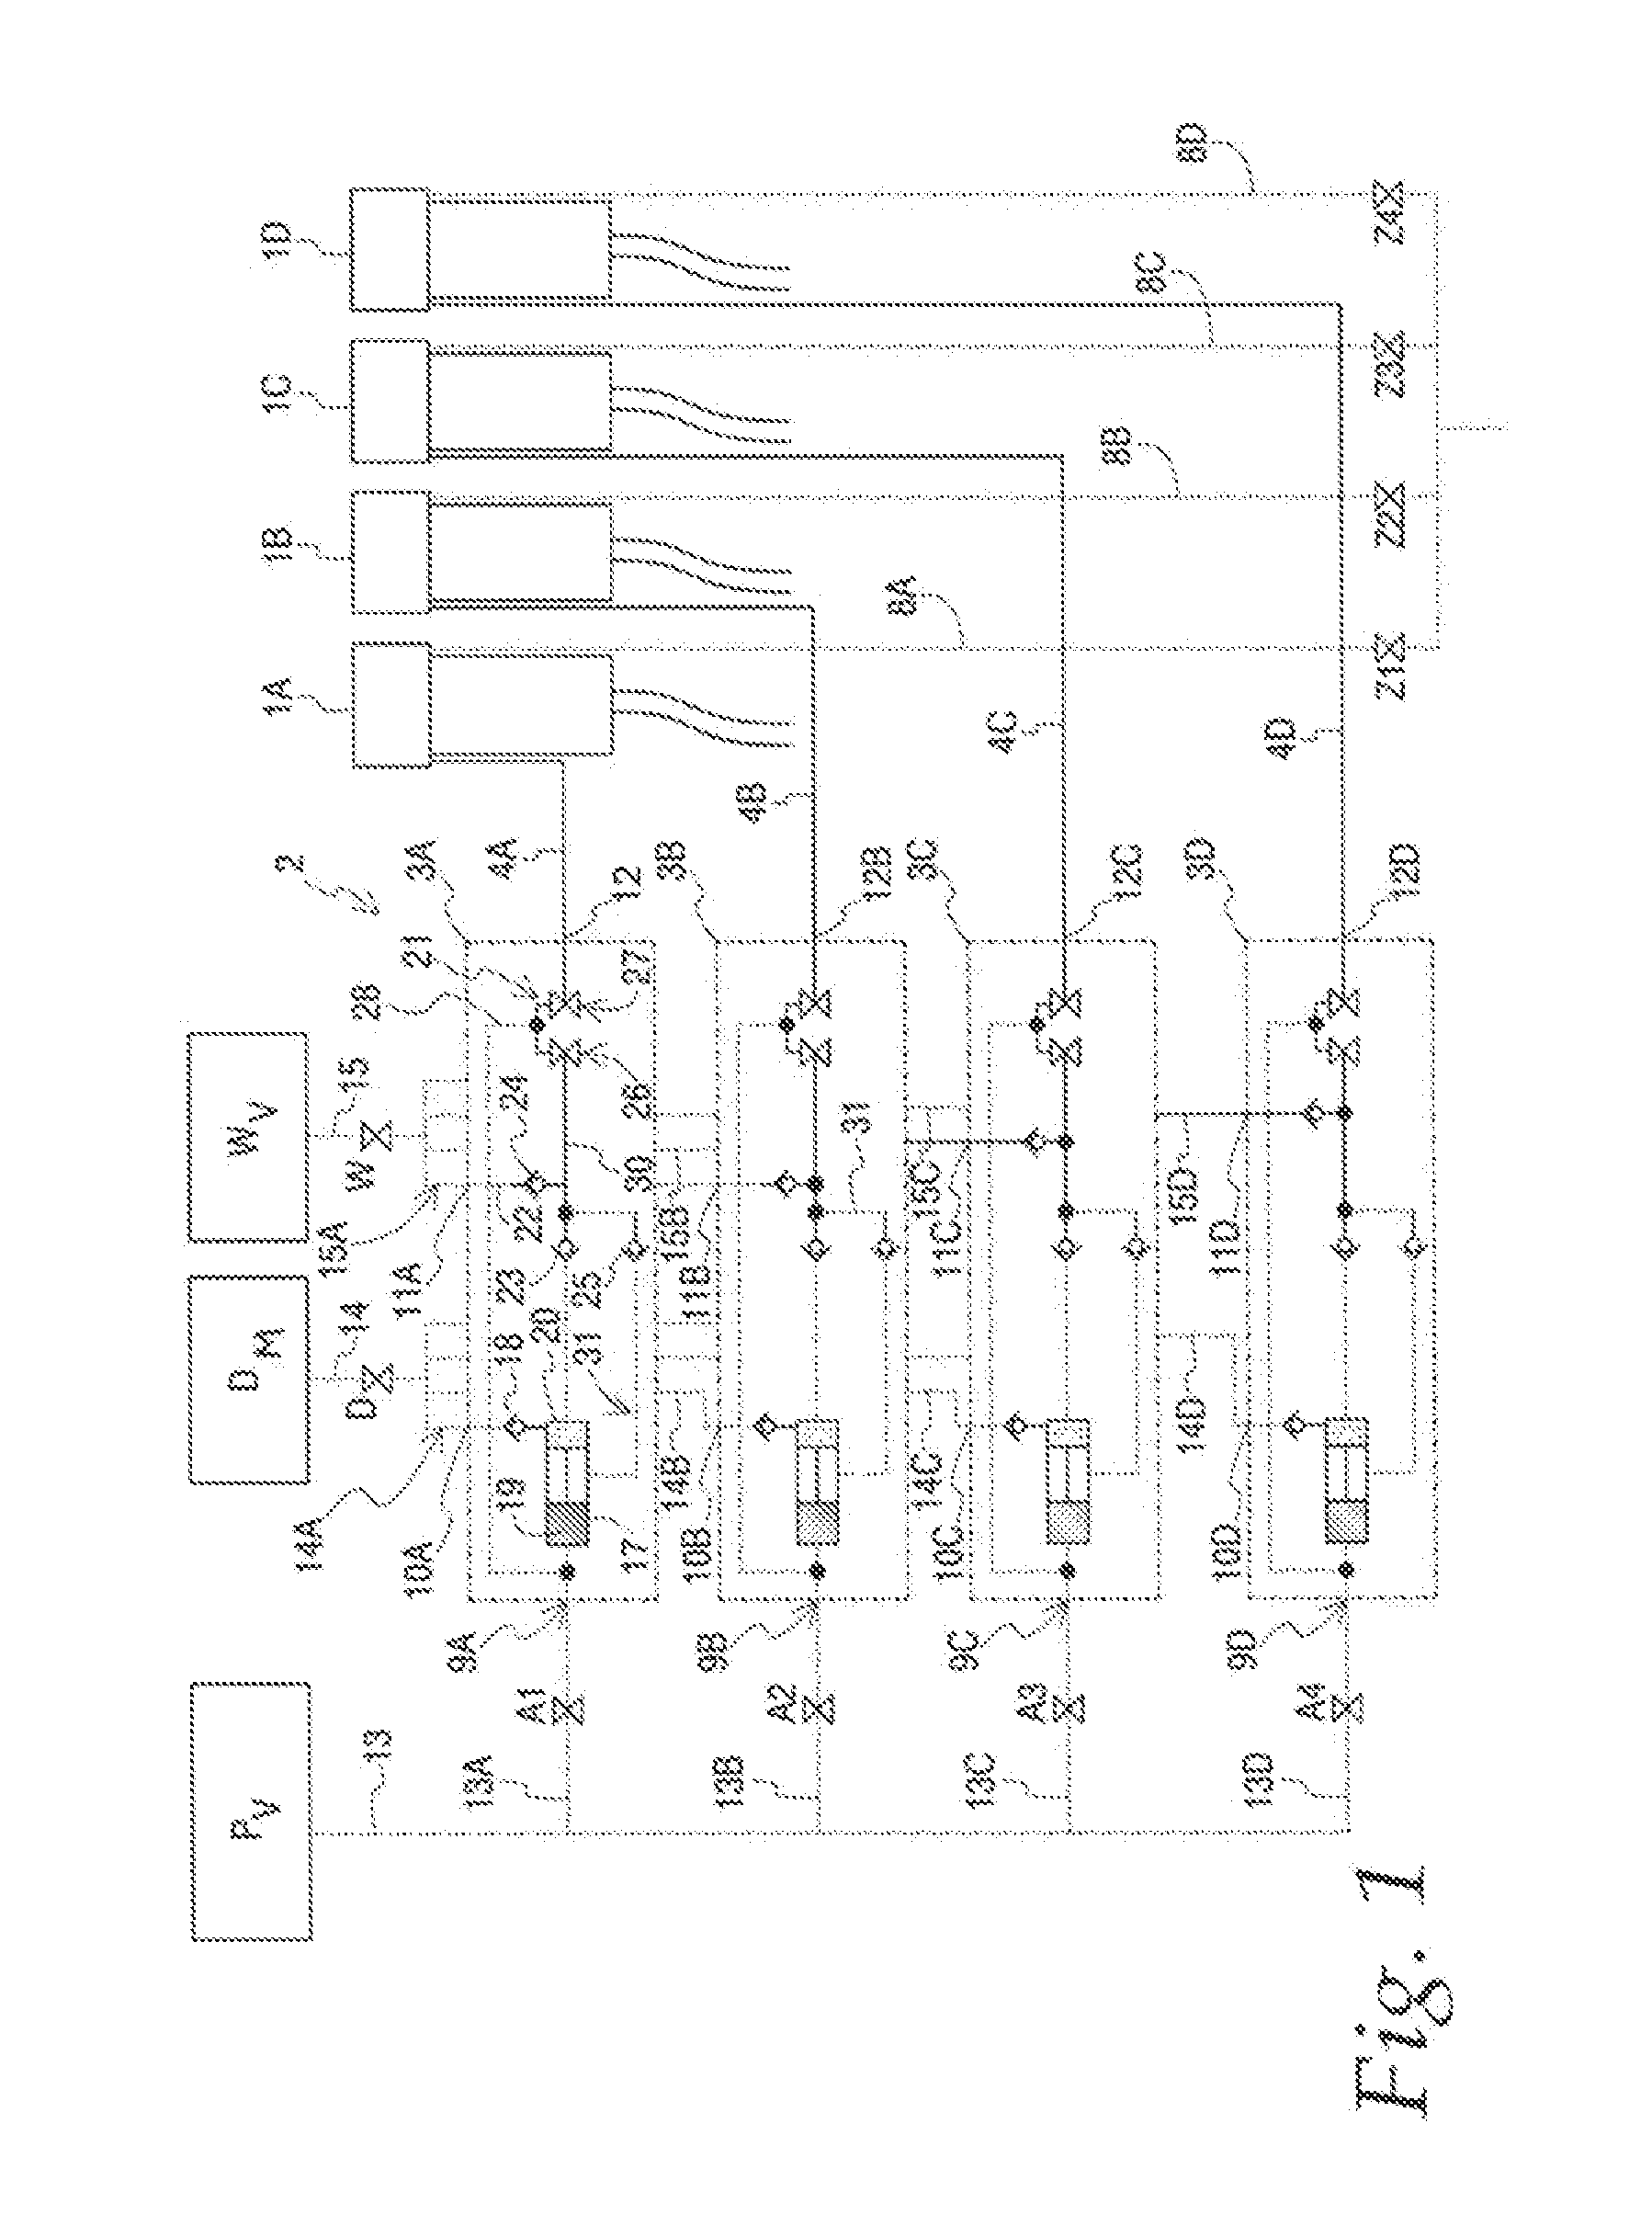 Method and device for automatically bringing a fluid into contact with the teats of an animal